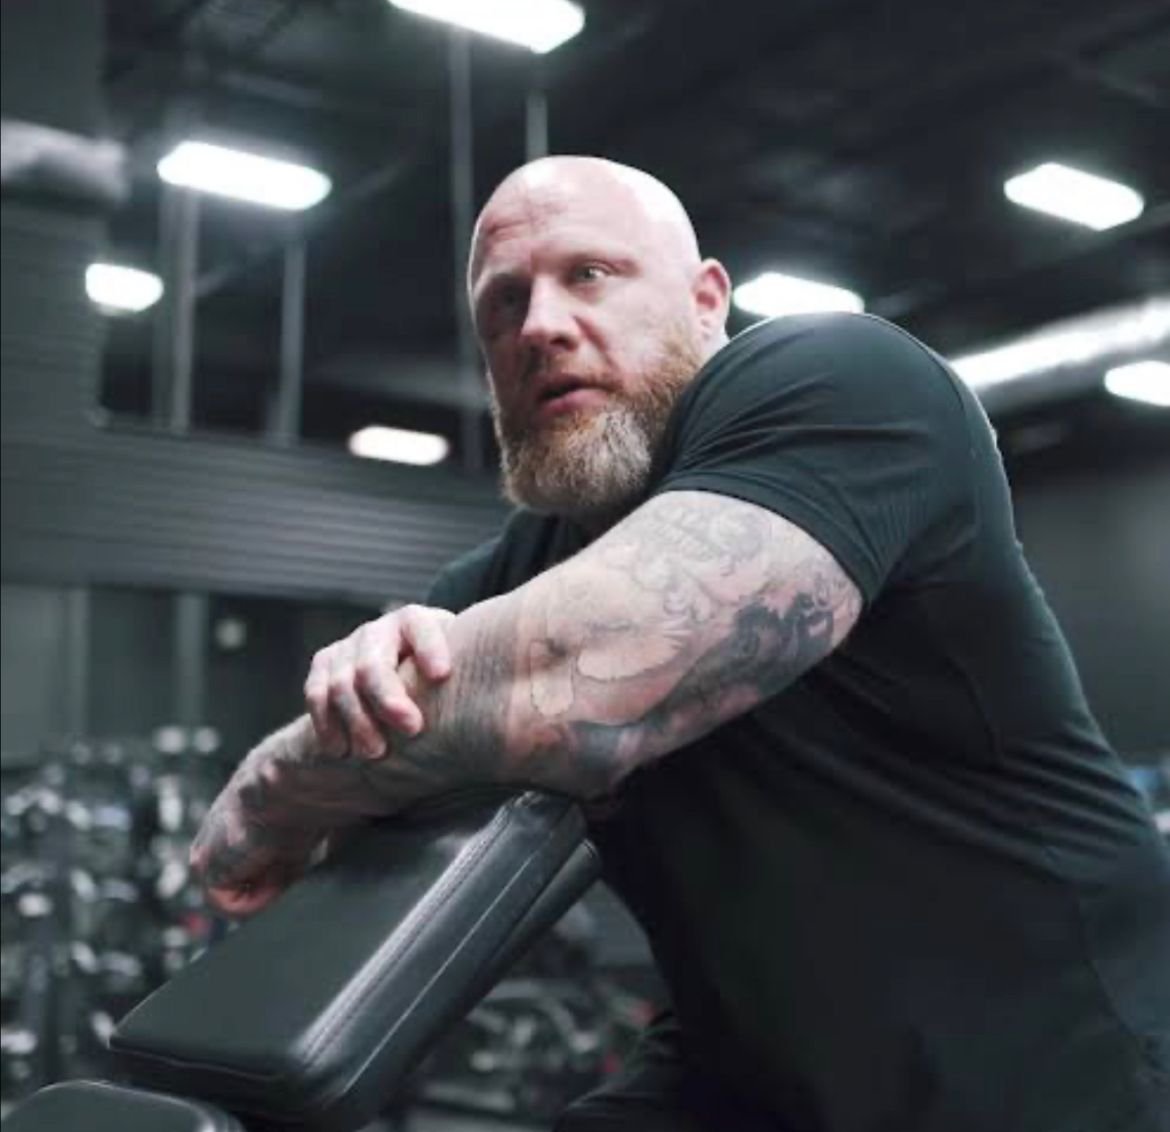 'You're not elite athletes': Bodybuilding beast slams fitness influencers for selling a lie on social media about sports